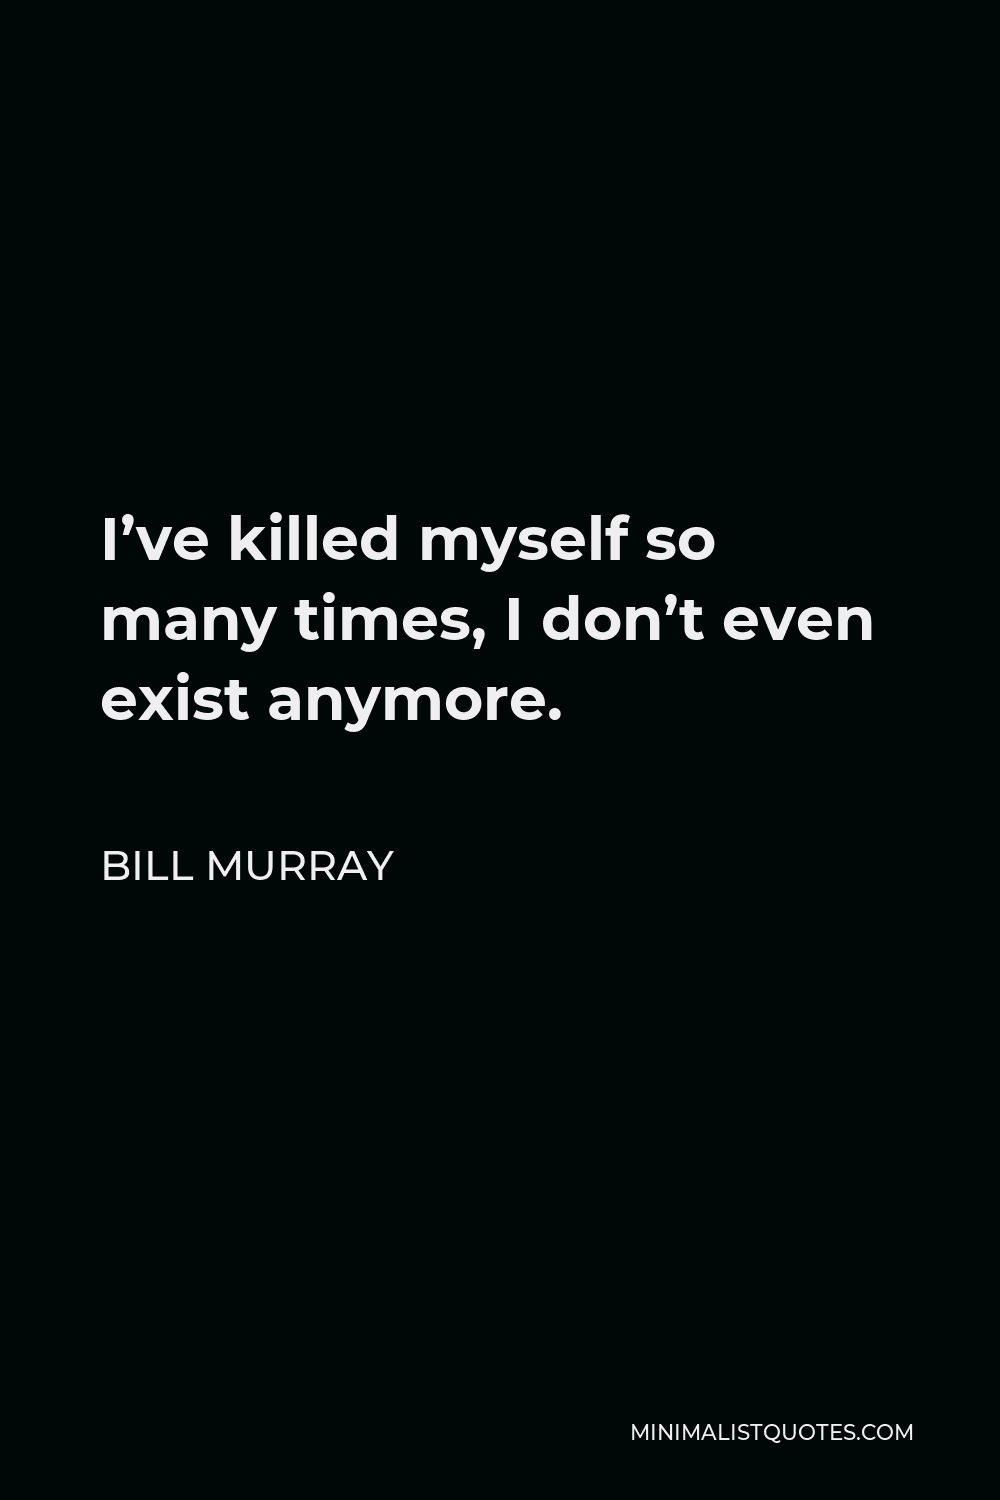 Bill Murray Quote - I’ve killed myself so many times, I don’t even exist anymore.